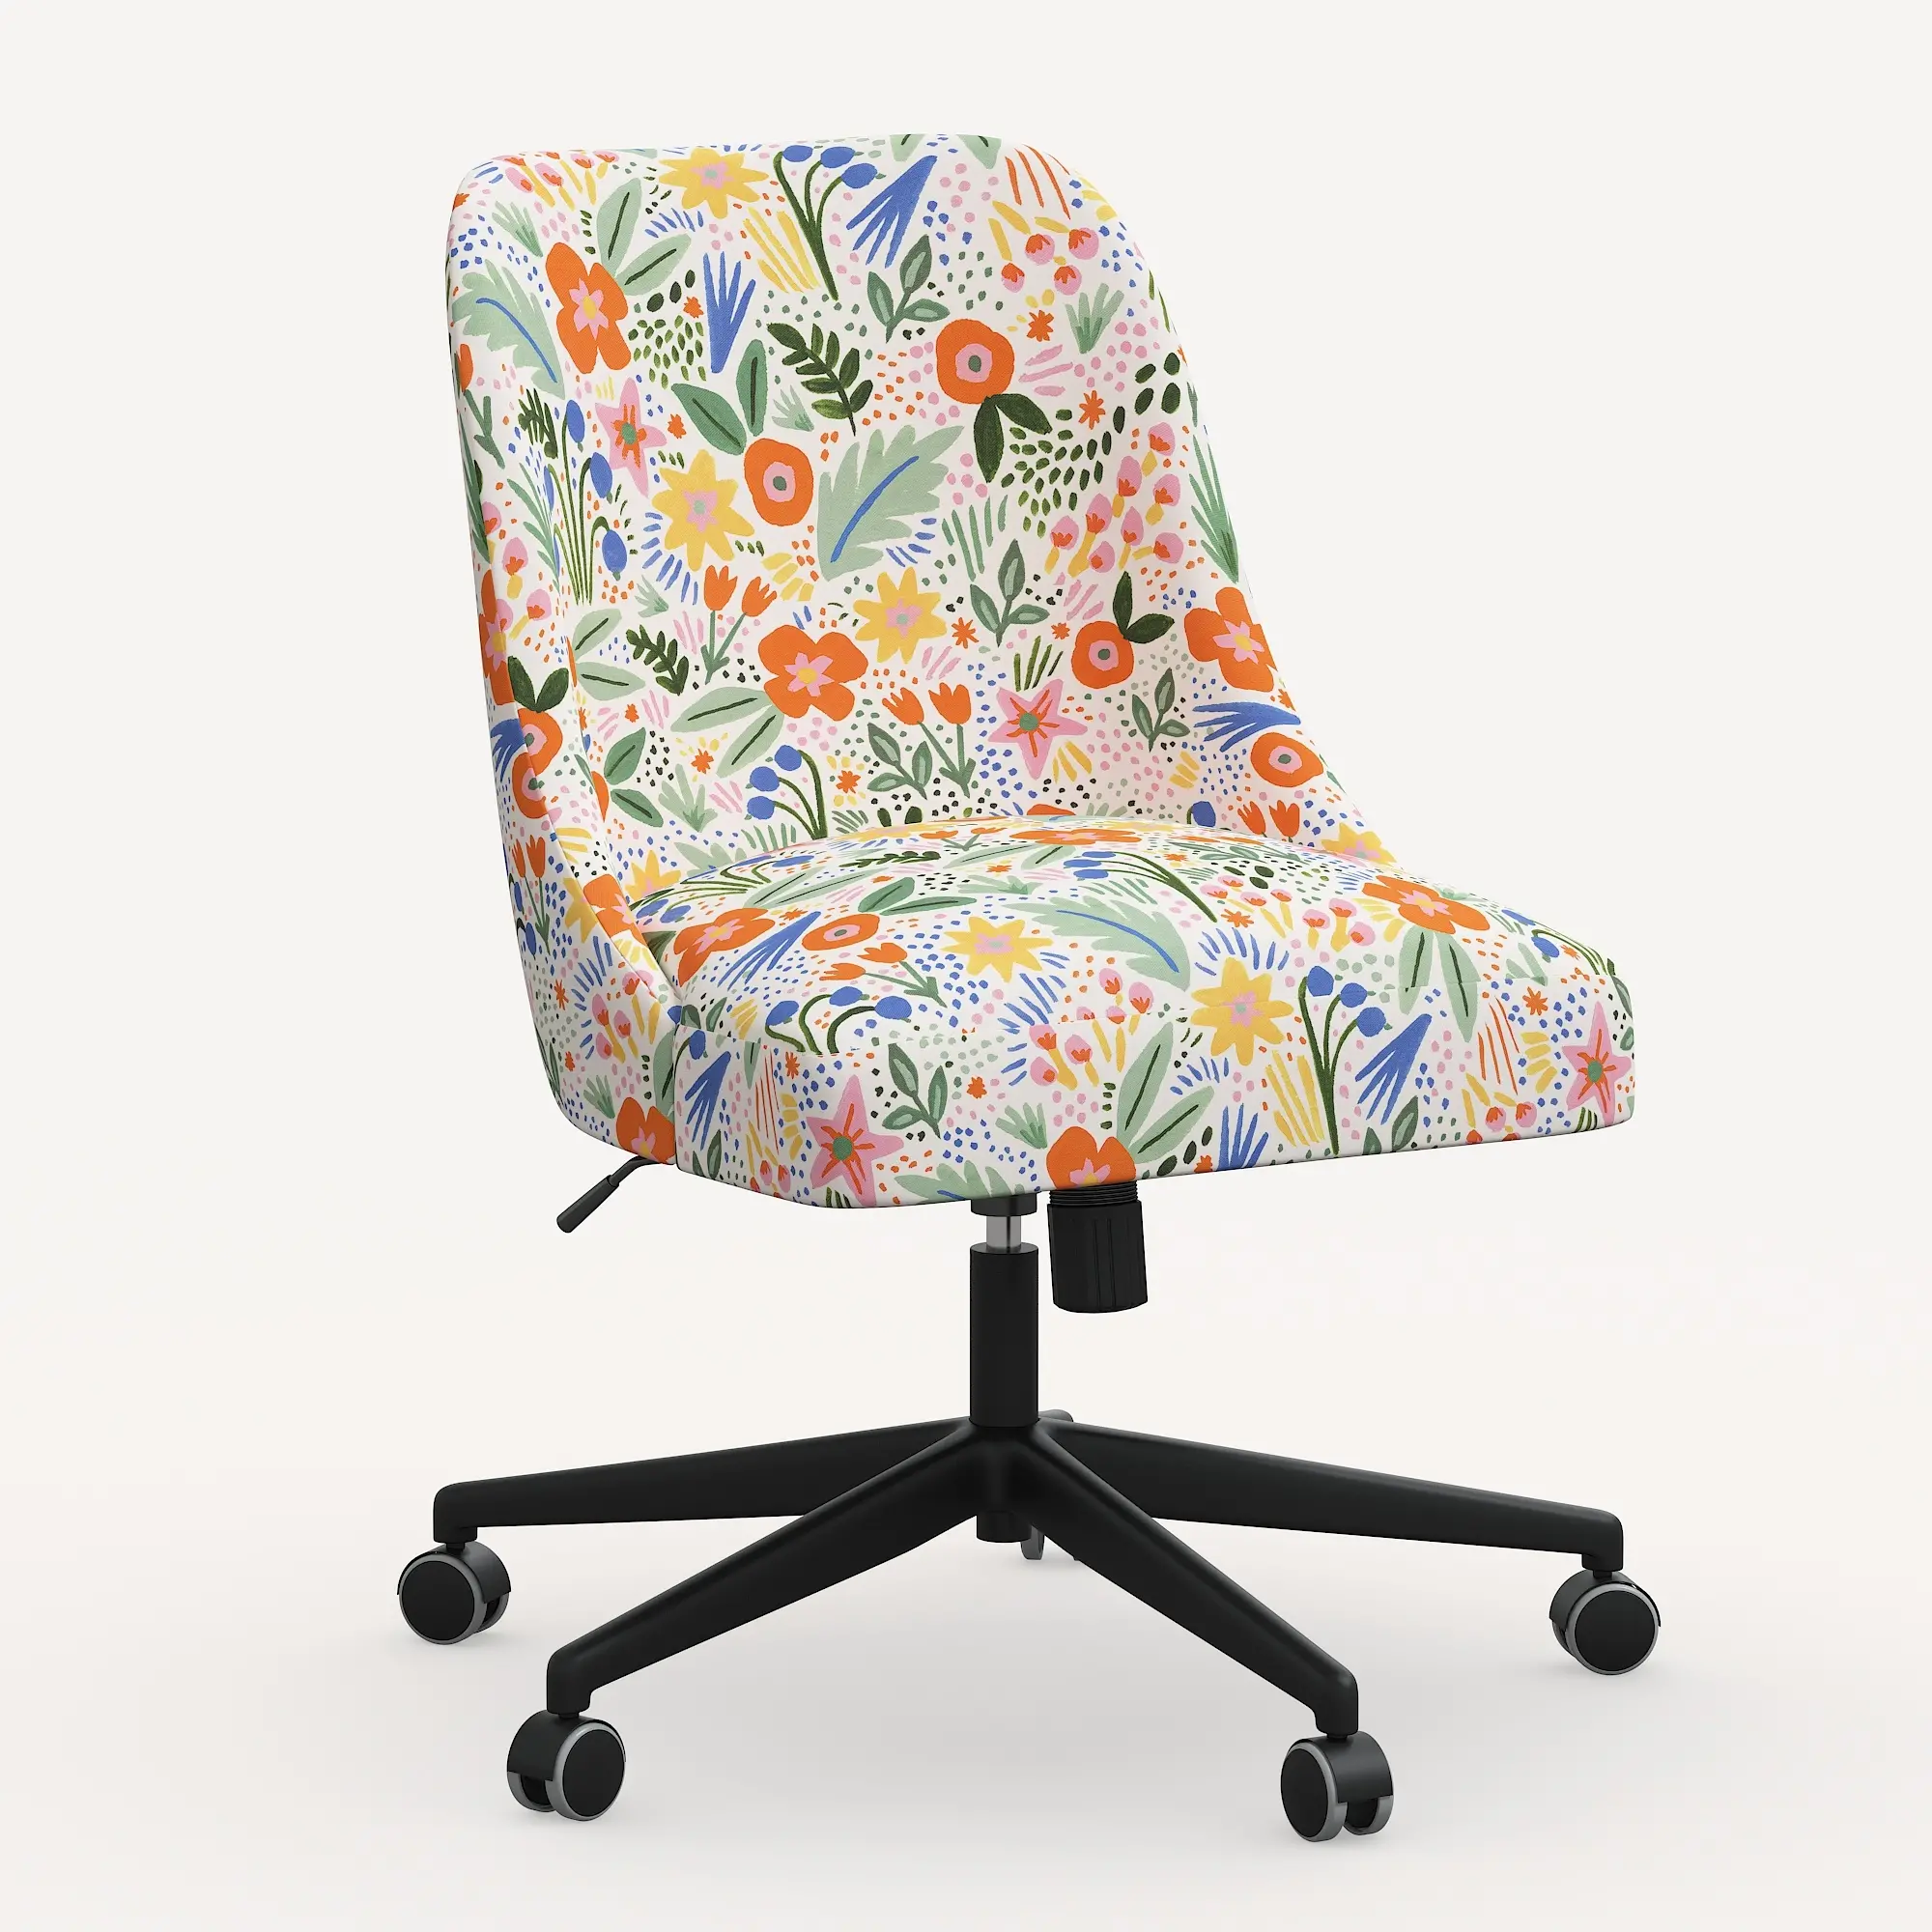 Rifle Paper Co. Oxford Multi Color Floral Office Chair